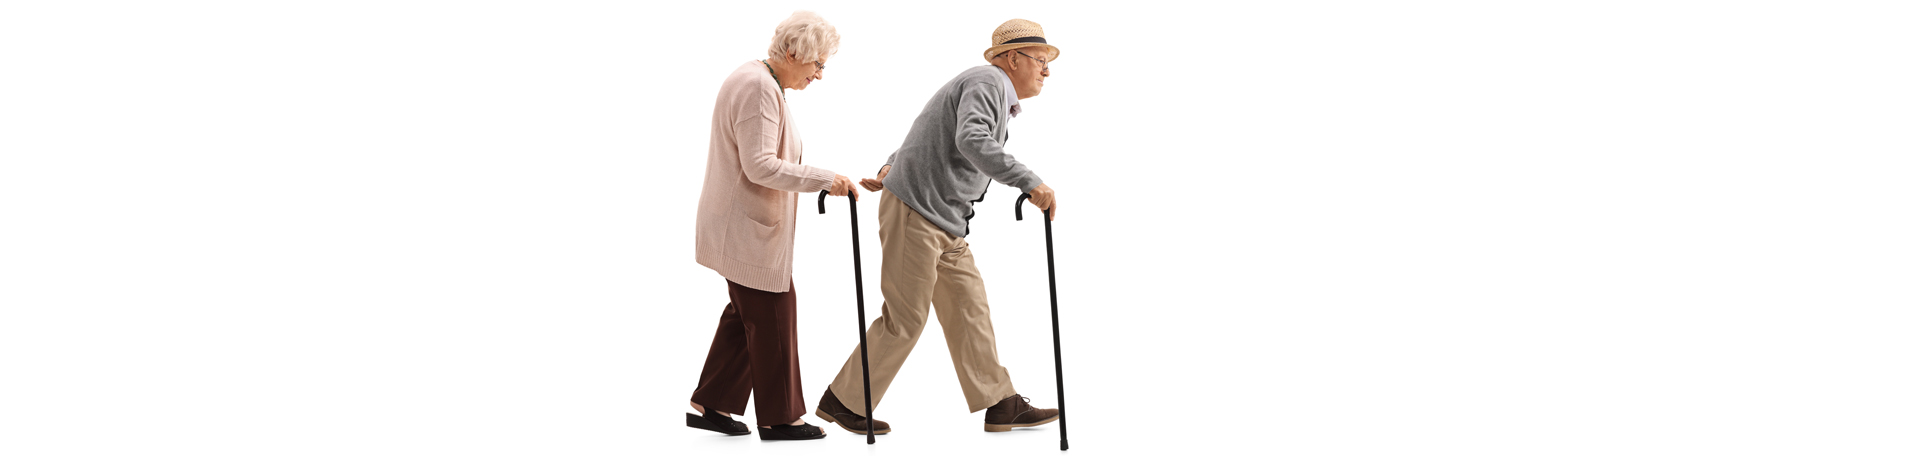 Easley back pain affects gait and walking patterns